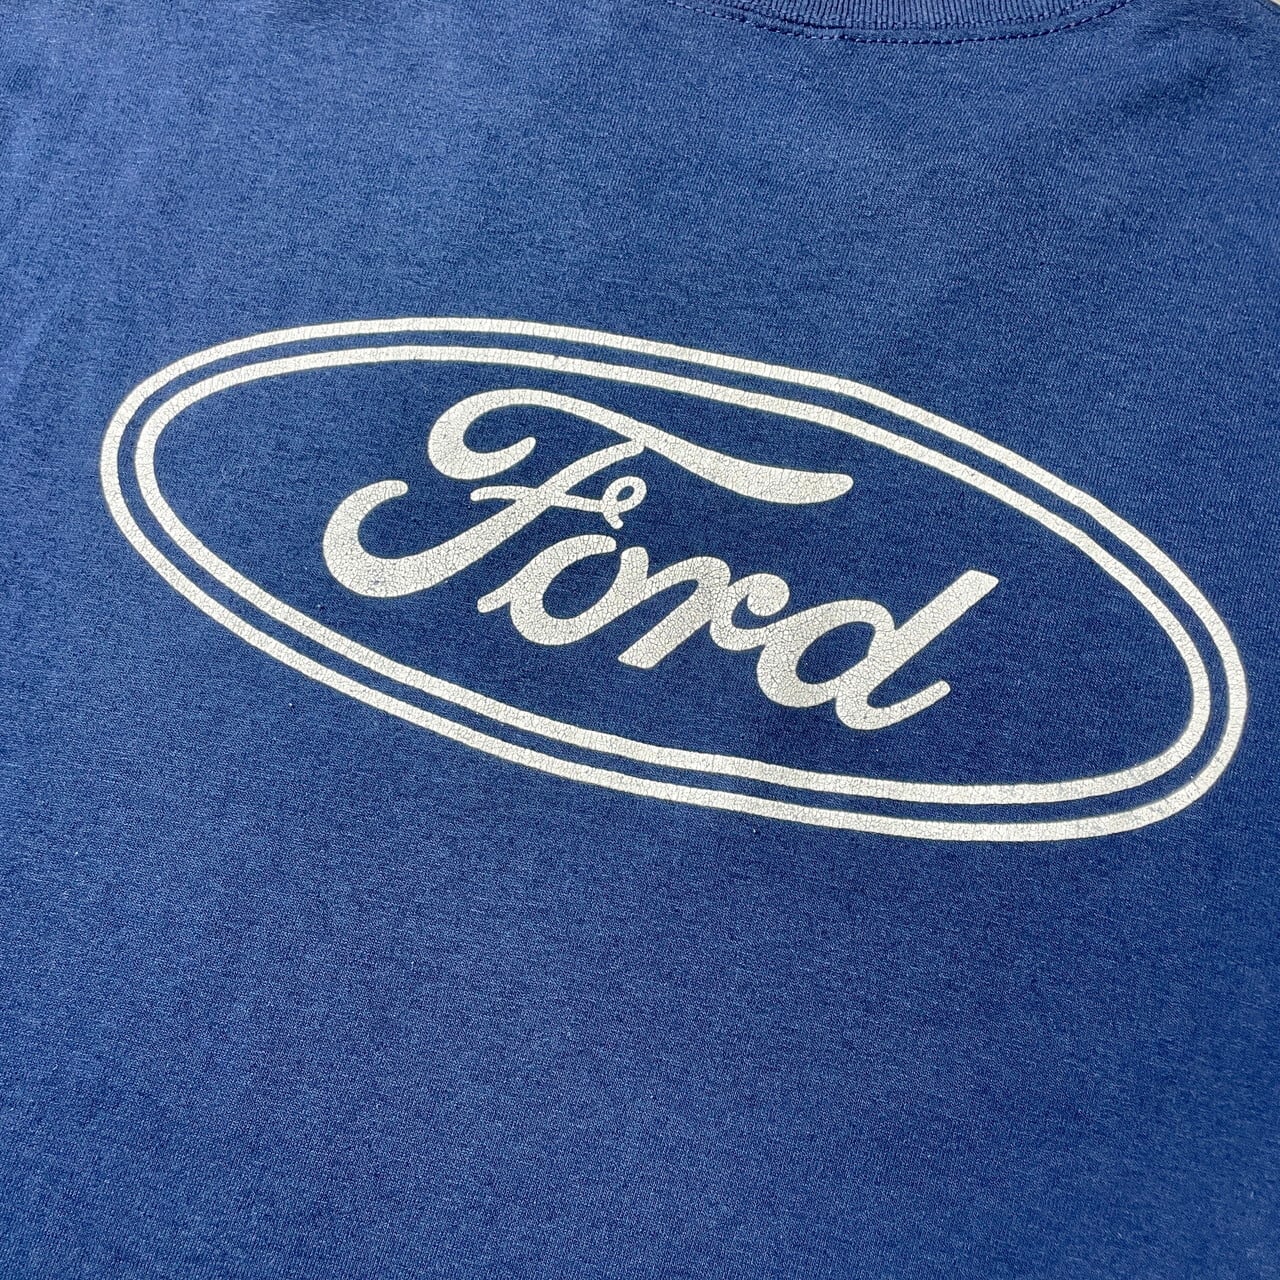 This is Ford Country Tシャツ　フォード　ヘンリーフォード